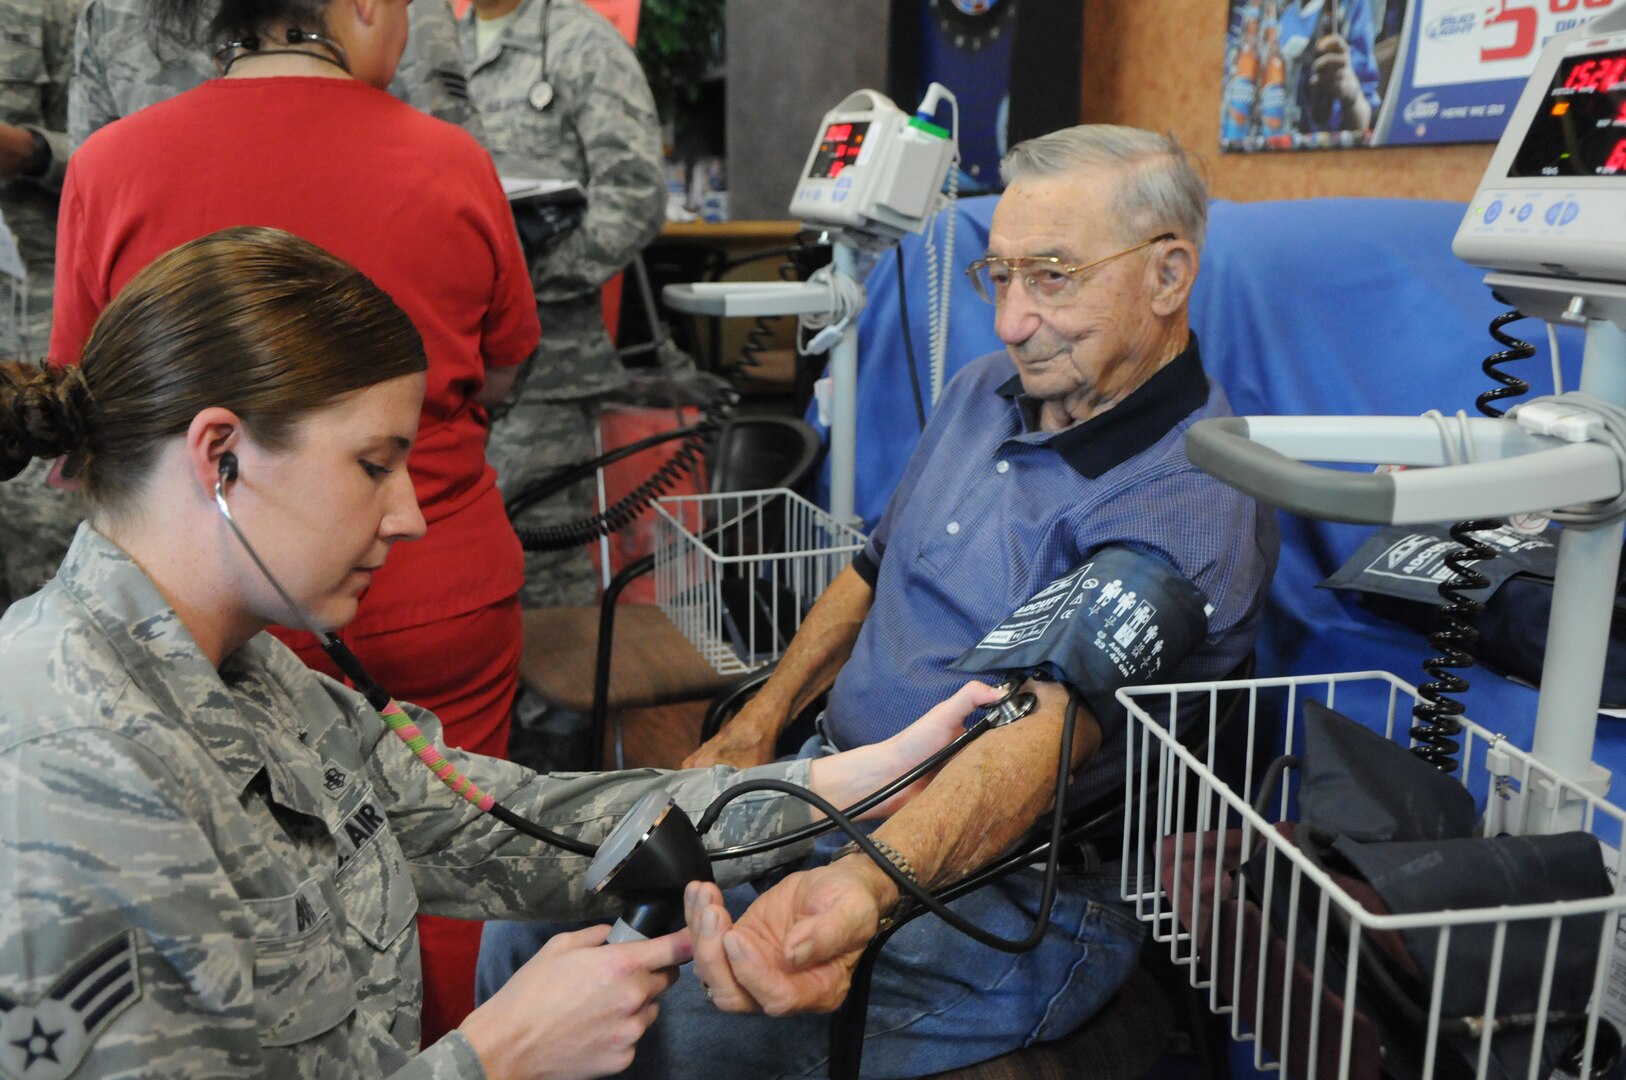 Senior Airman Kelly Boos (left), 359th Medical Operations Squadron medical technician, takes a blood pressure reading for Bill Jurczyn during the retiree appreciation event held at Joint Base San Antonio-Randolph, Texas, Sept. 22. The event is held annually at the Kendrick Club to educate the local retiree community on services available to them. (U.S. Air Force photo by Rich McFadden) 